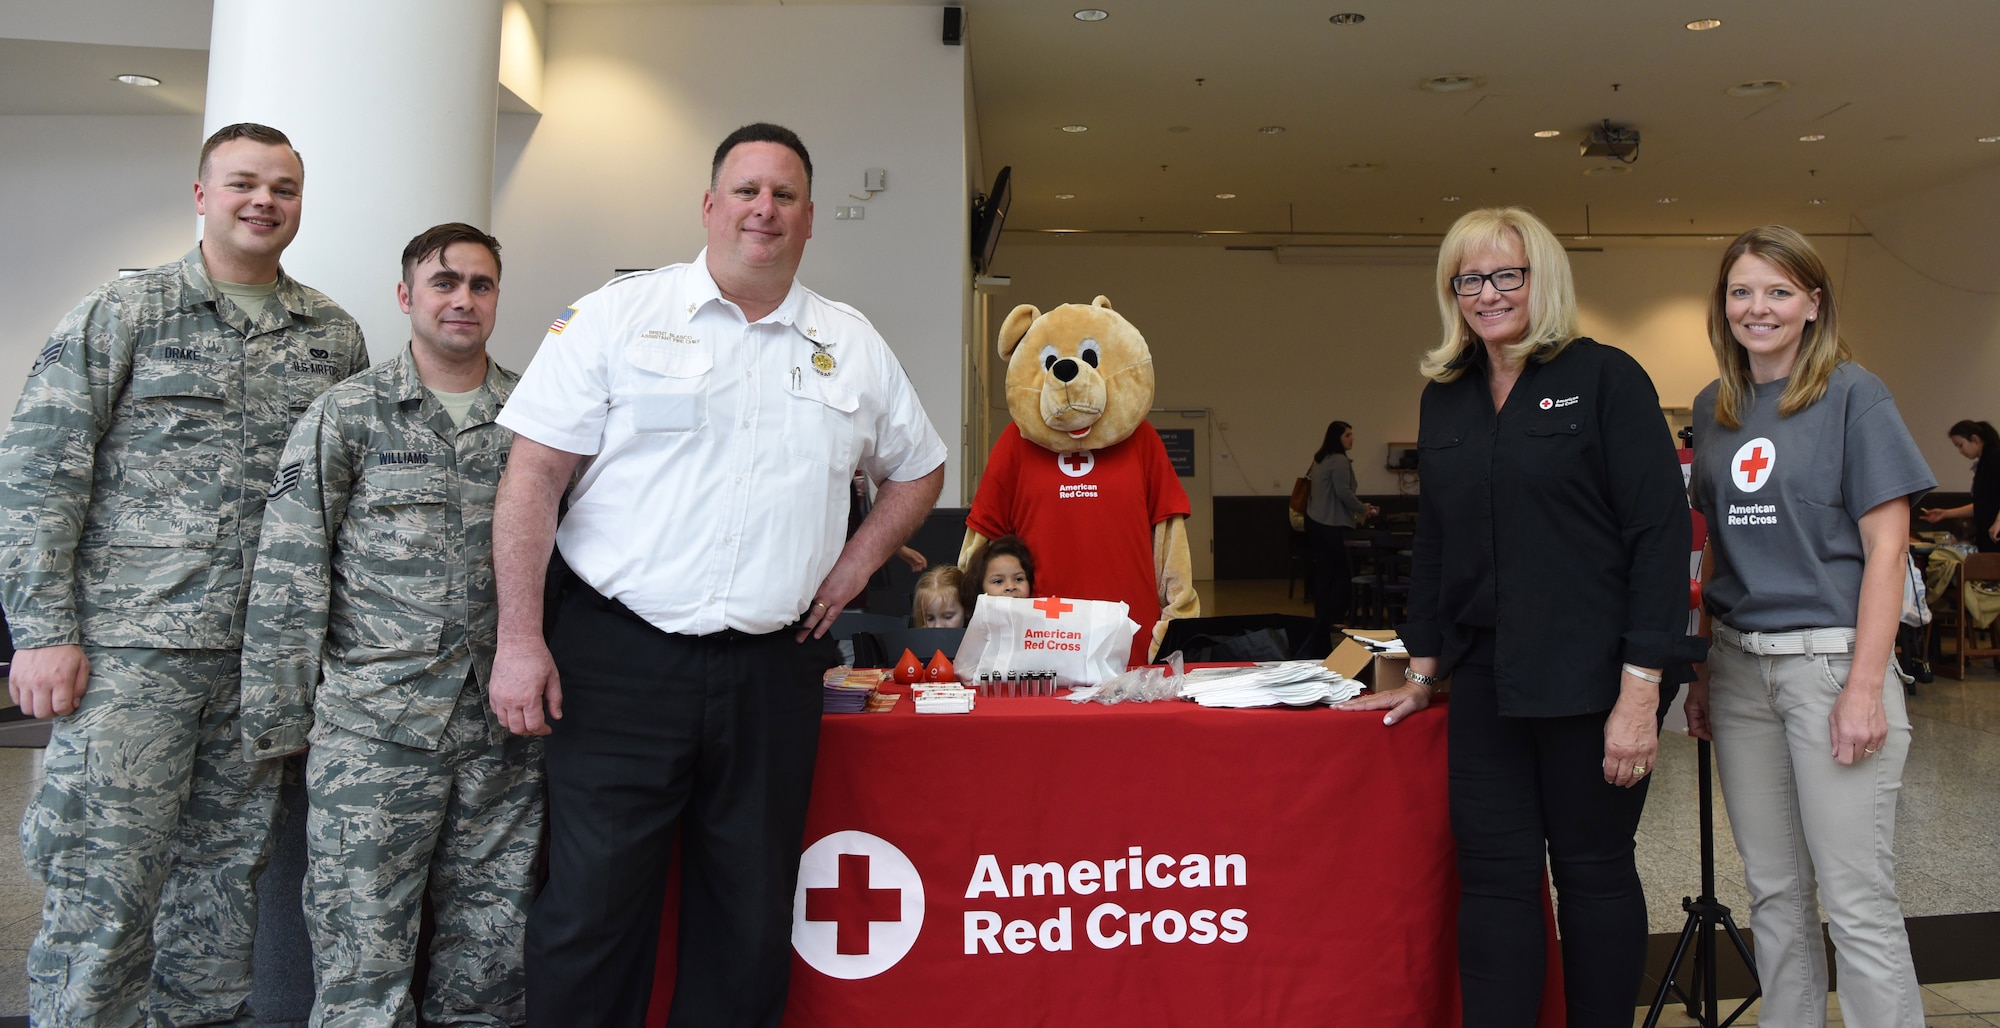 Kaiserslautern Military Community Fire Emergency Services members and American Red Cross members pose in front of their booth at the Kaiserslautern Military Community Center on Ramstein Air Base, Germany, May 11, 2018. The team handed out 200 free smoke detector batteries in an effort to raise awareness about the importance of fire safety.